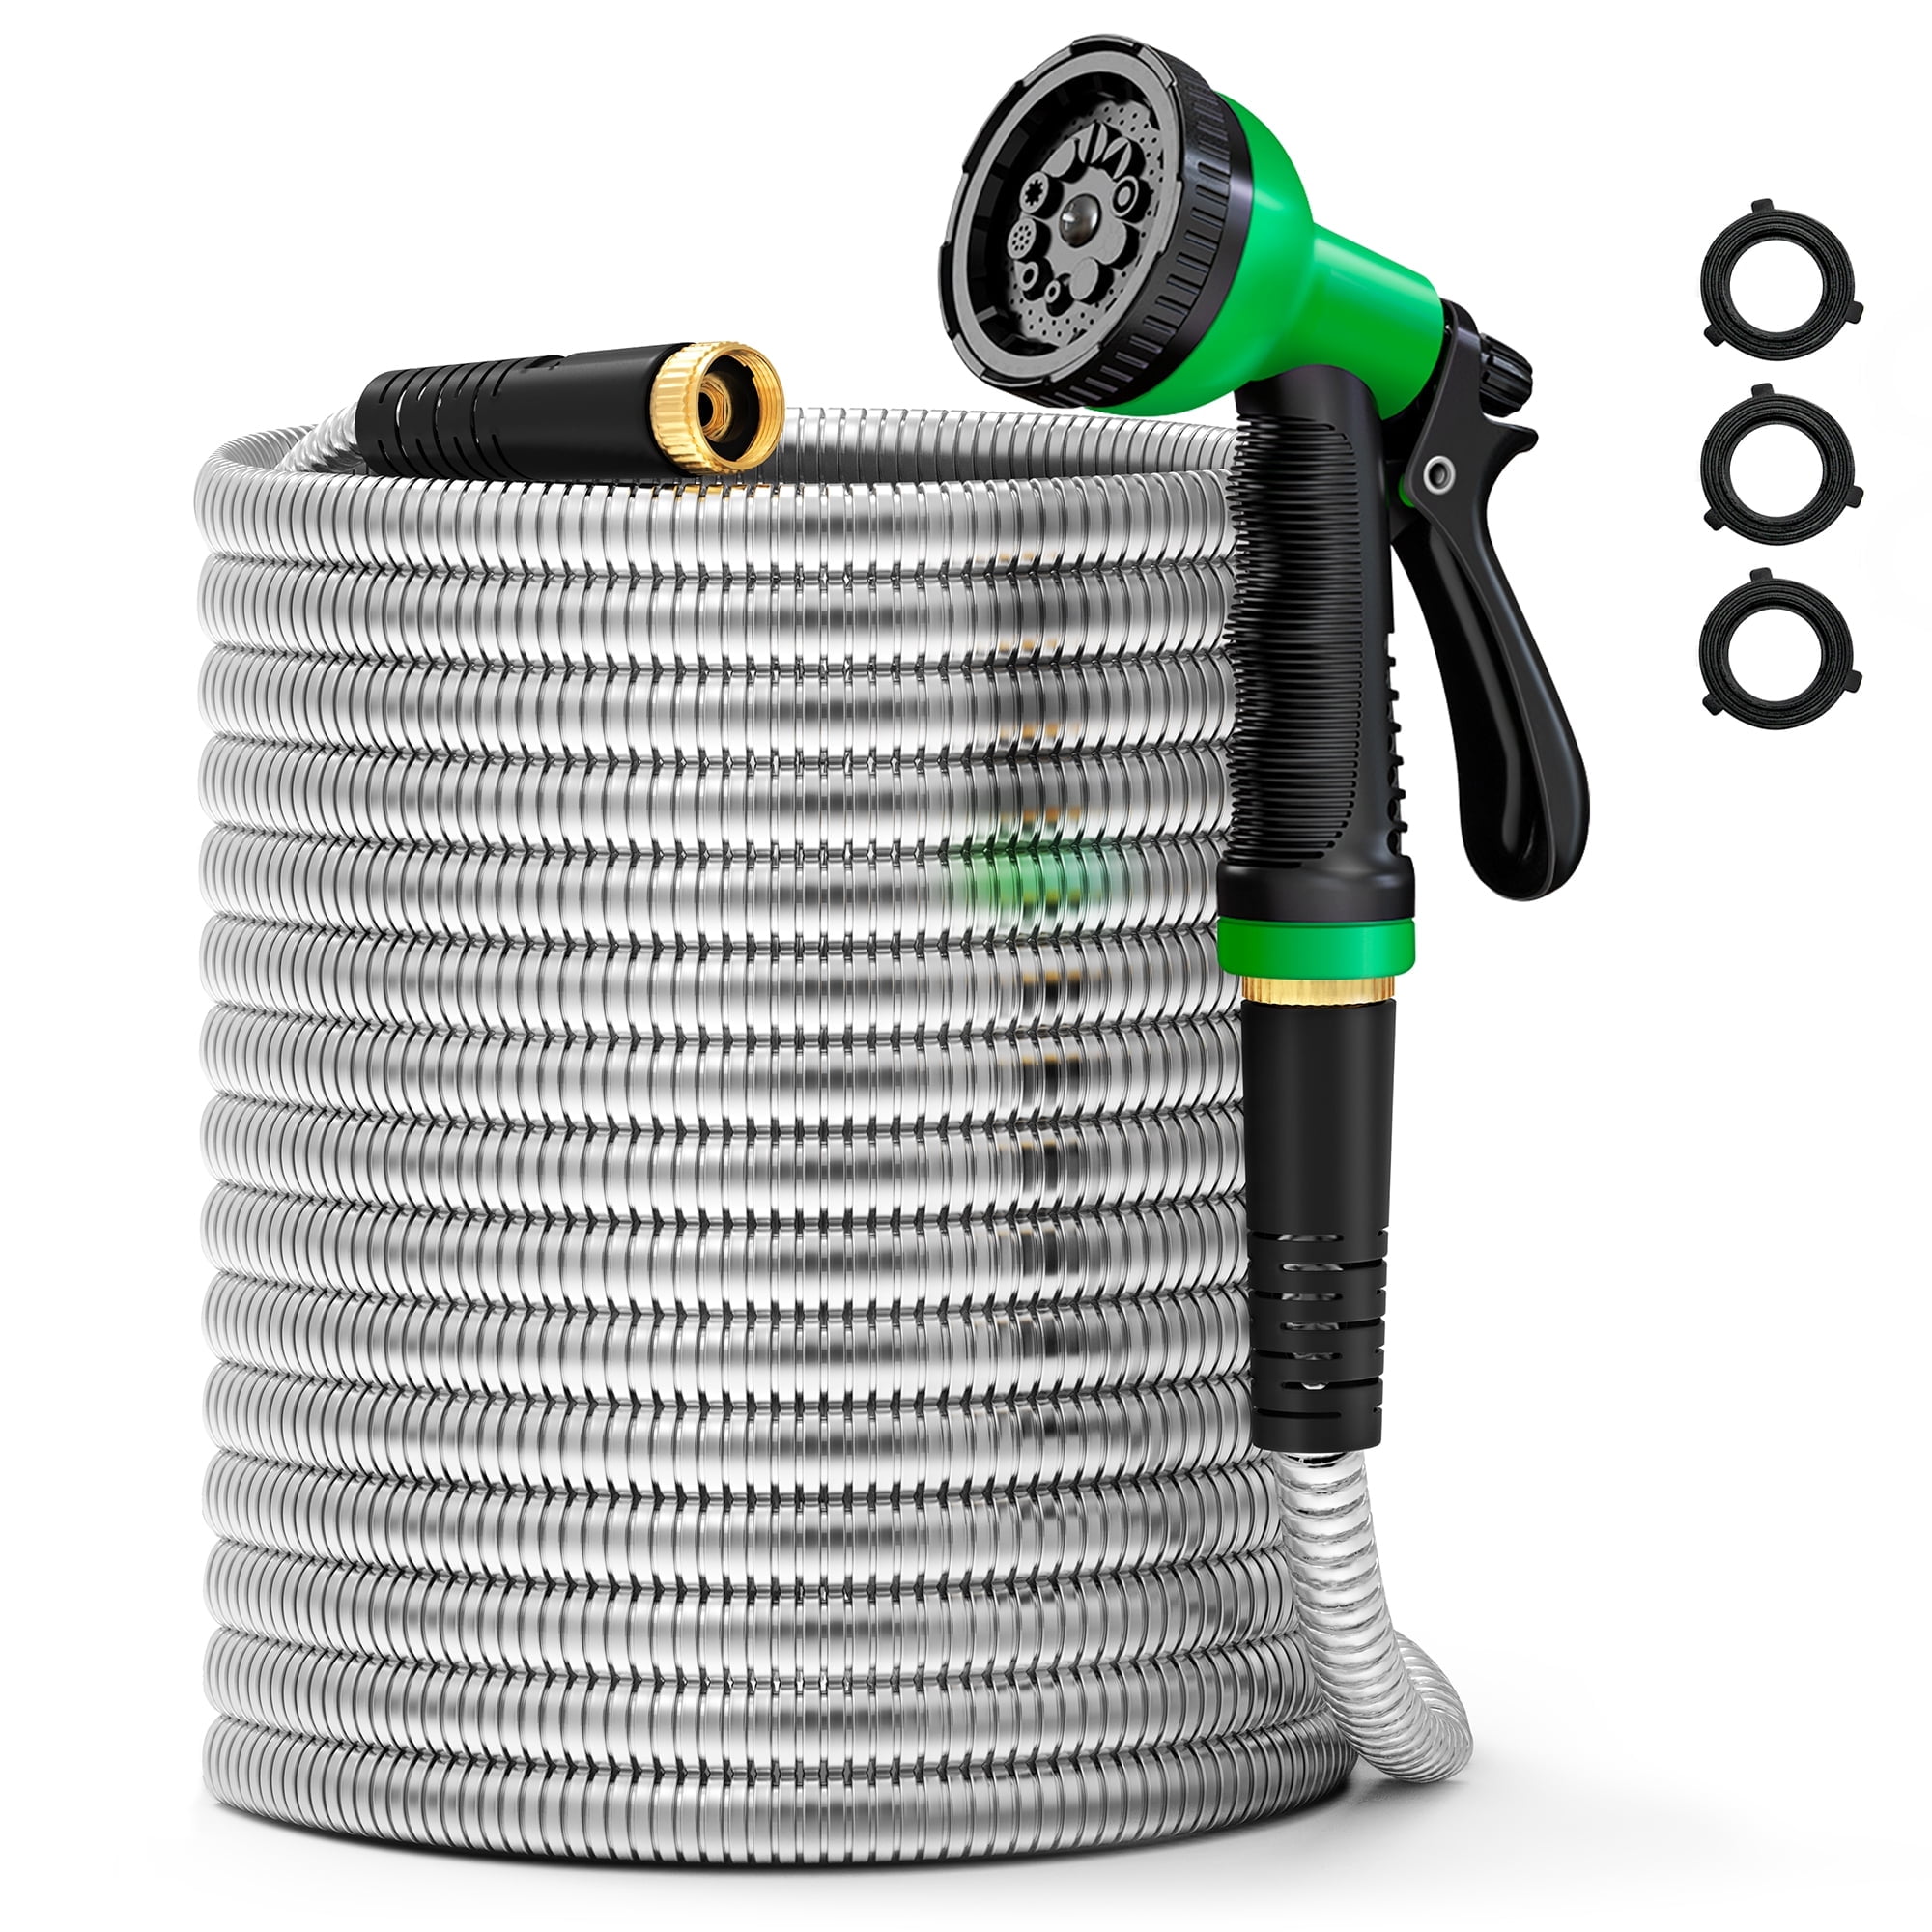 Expandable Garden hose 50 ft with 10 Function Sprayer Nozzle